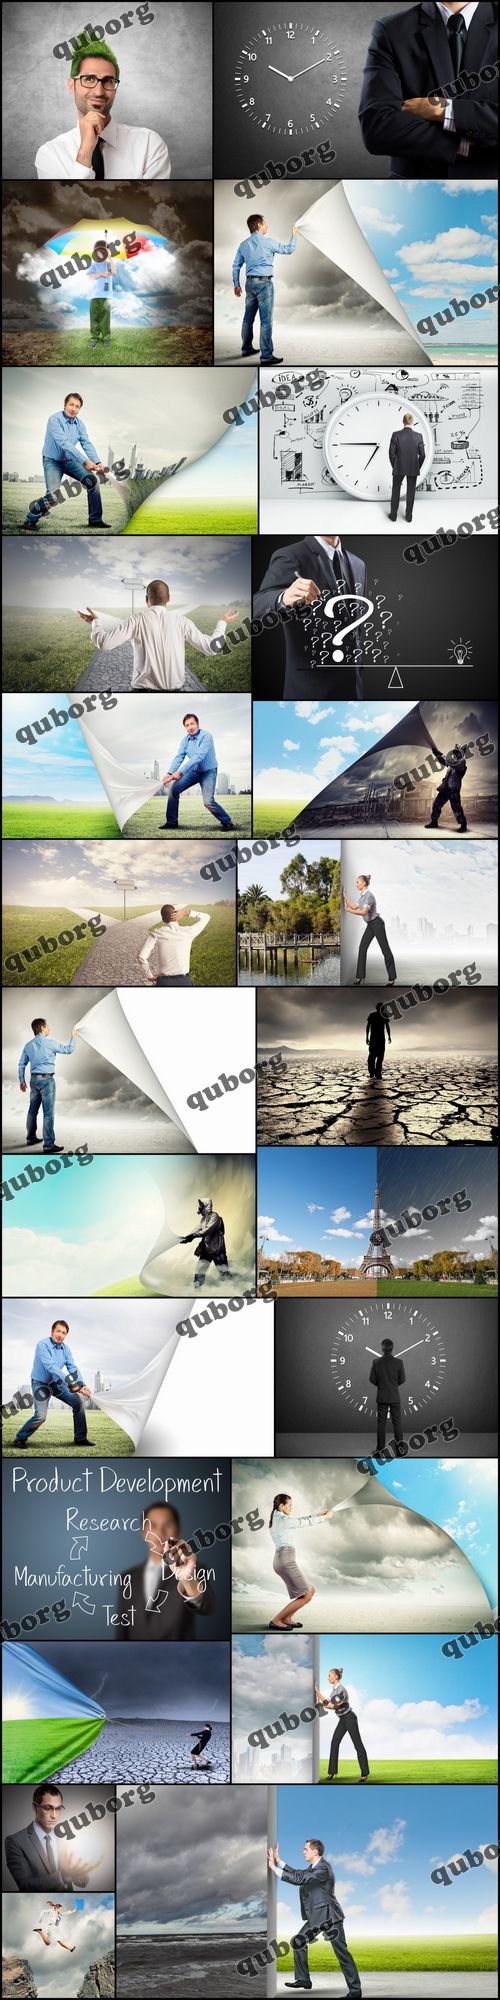 Stock Photos - Concept How to Change 2